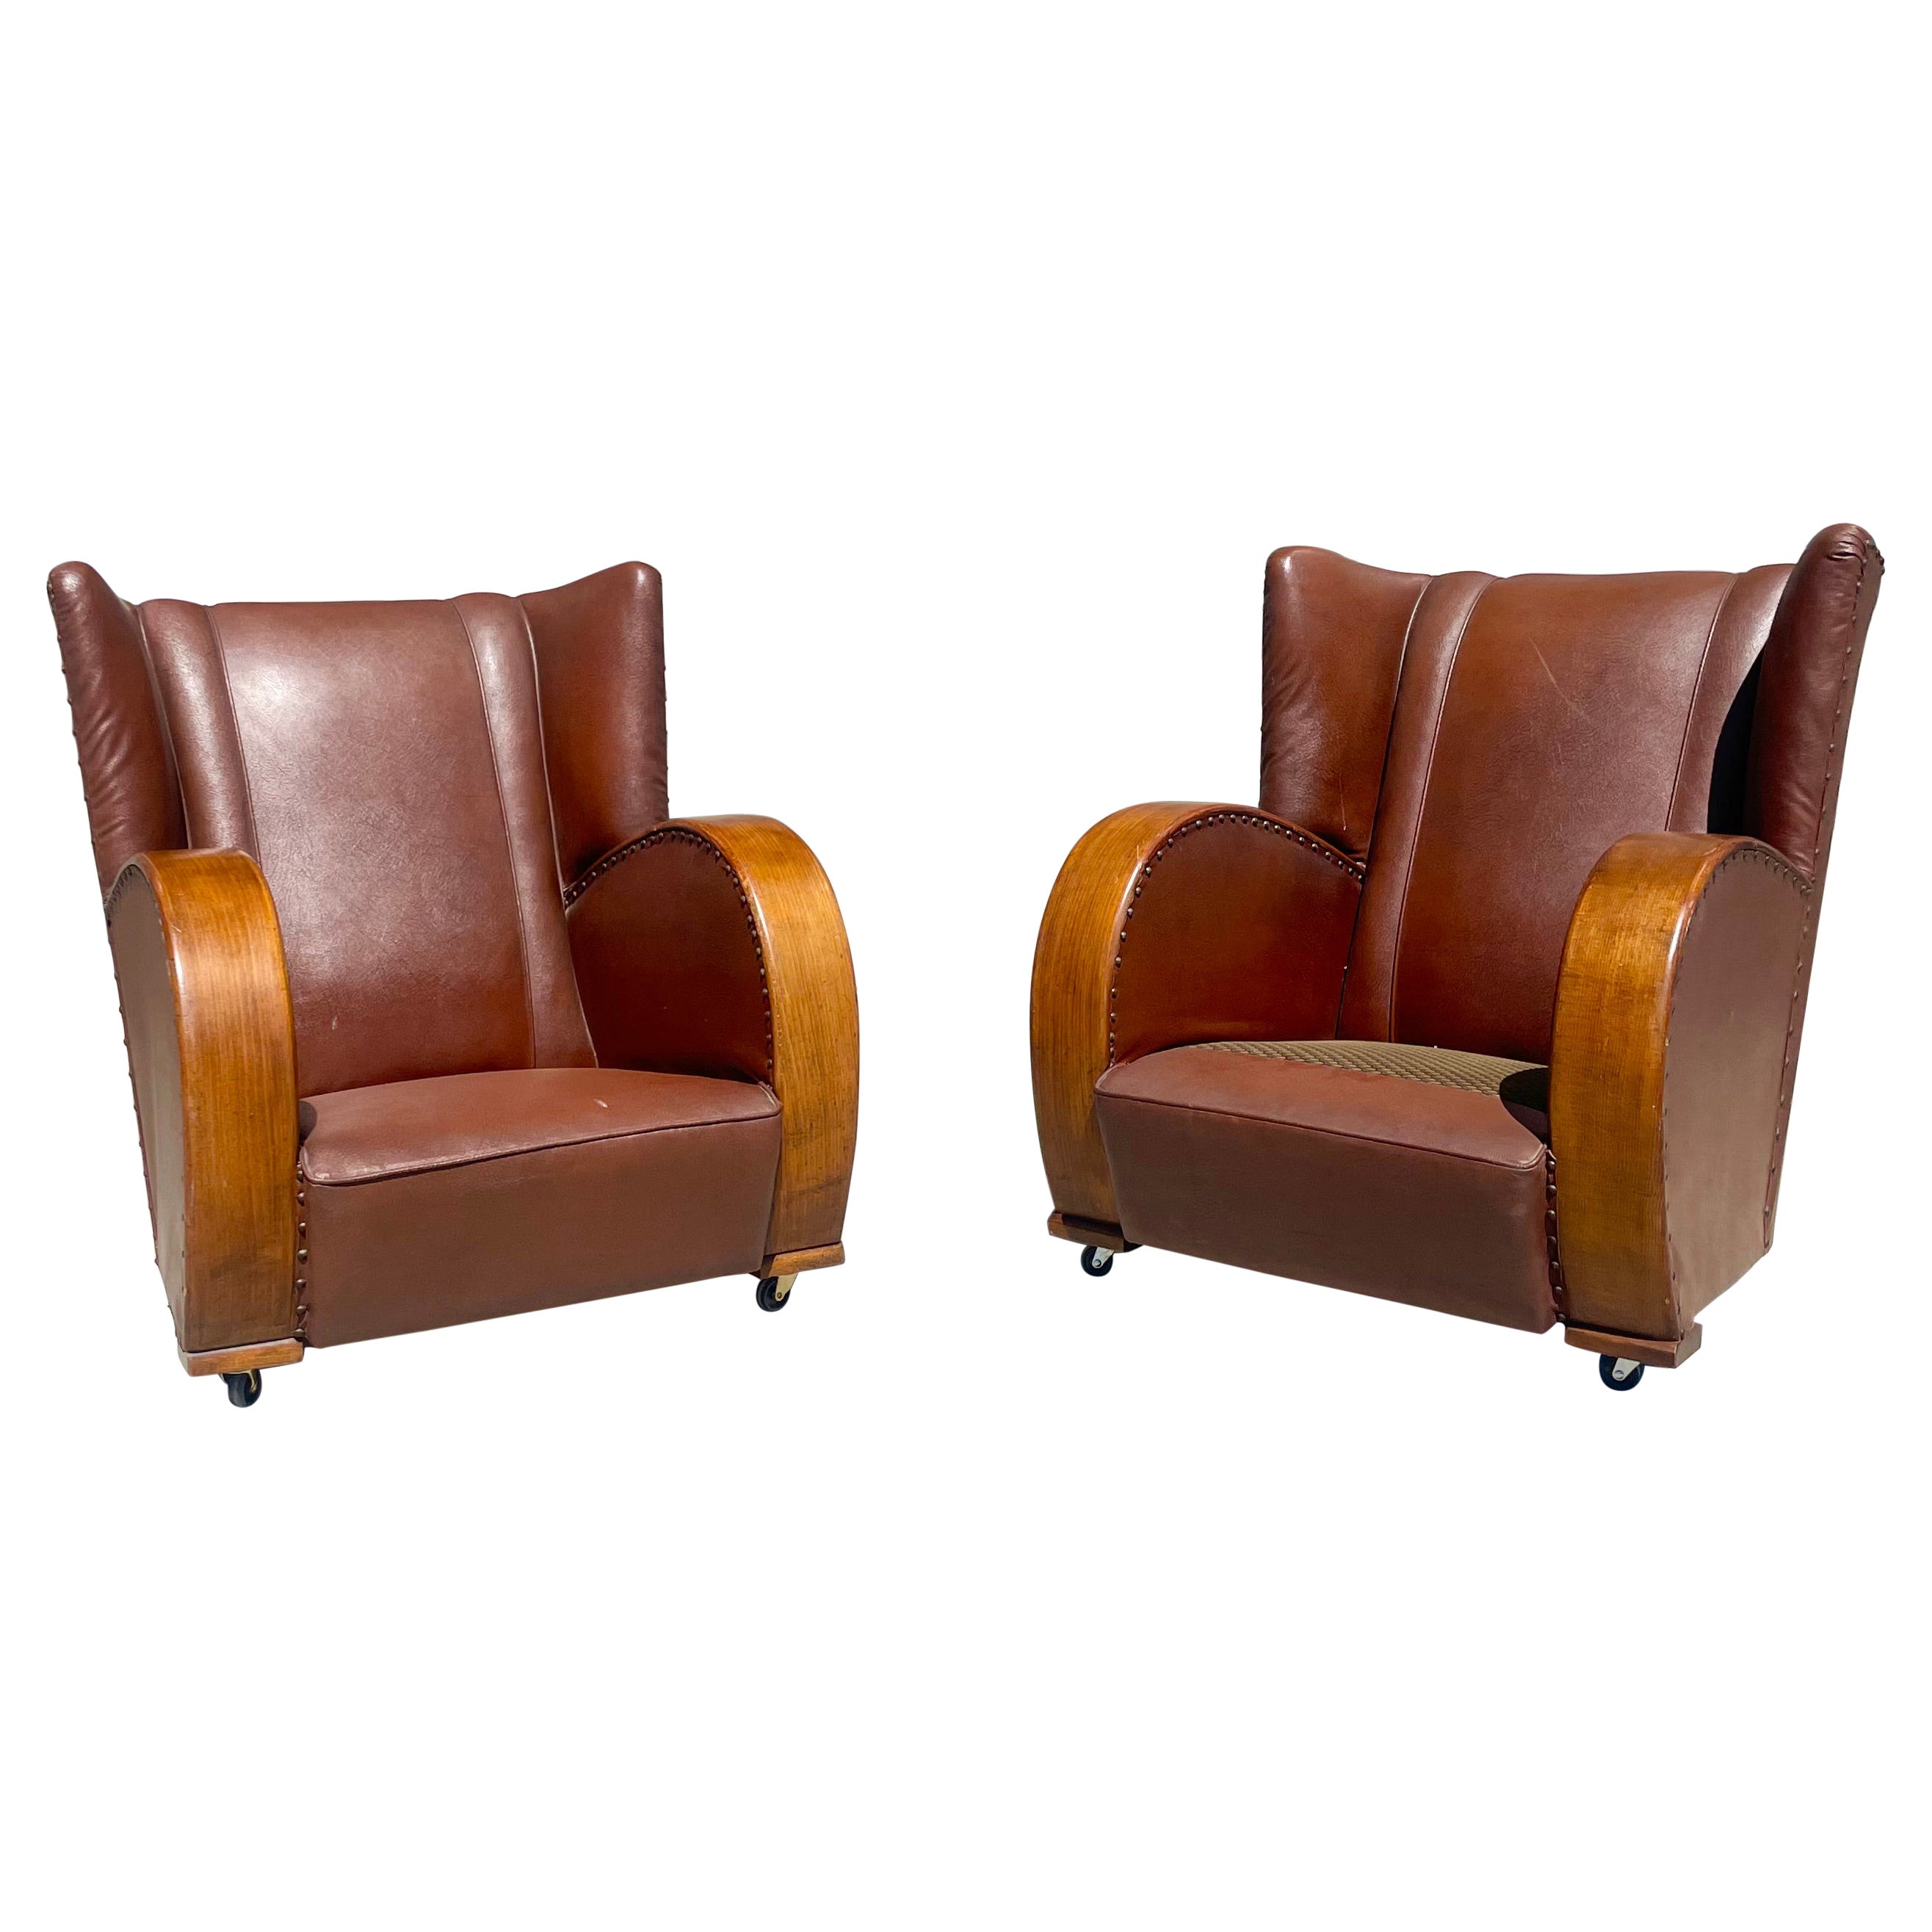 Vintage Art Deco Leather Lounge Chairs For Sale